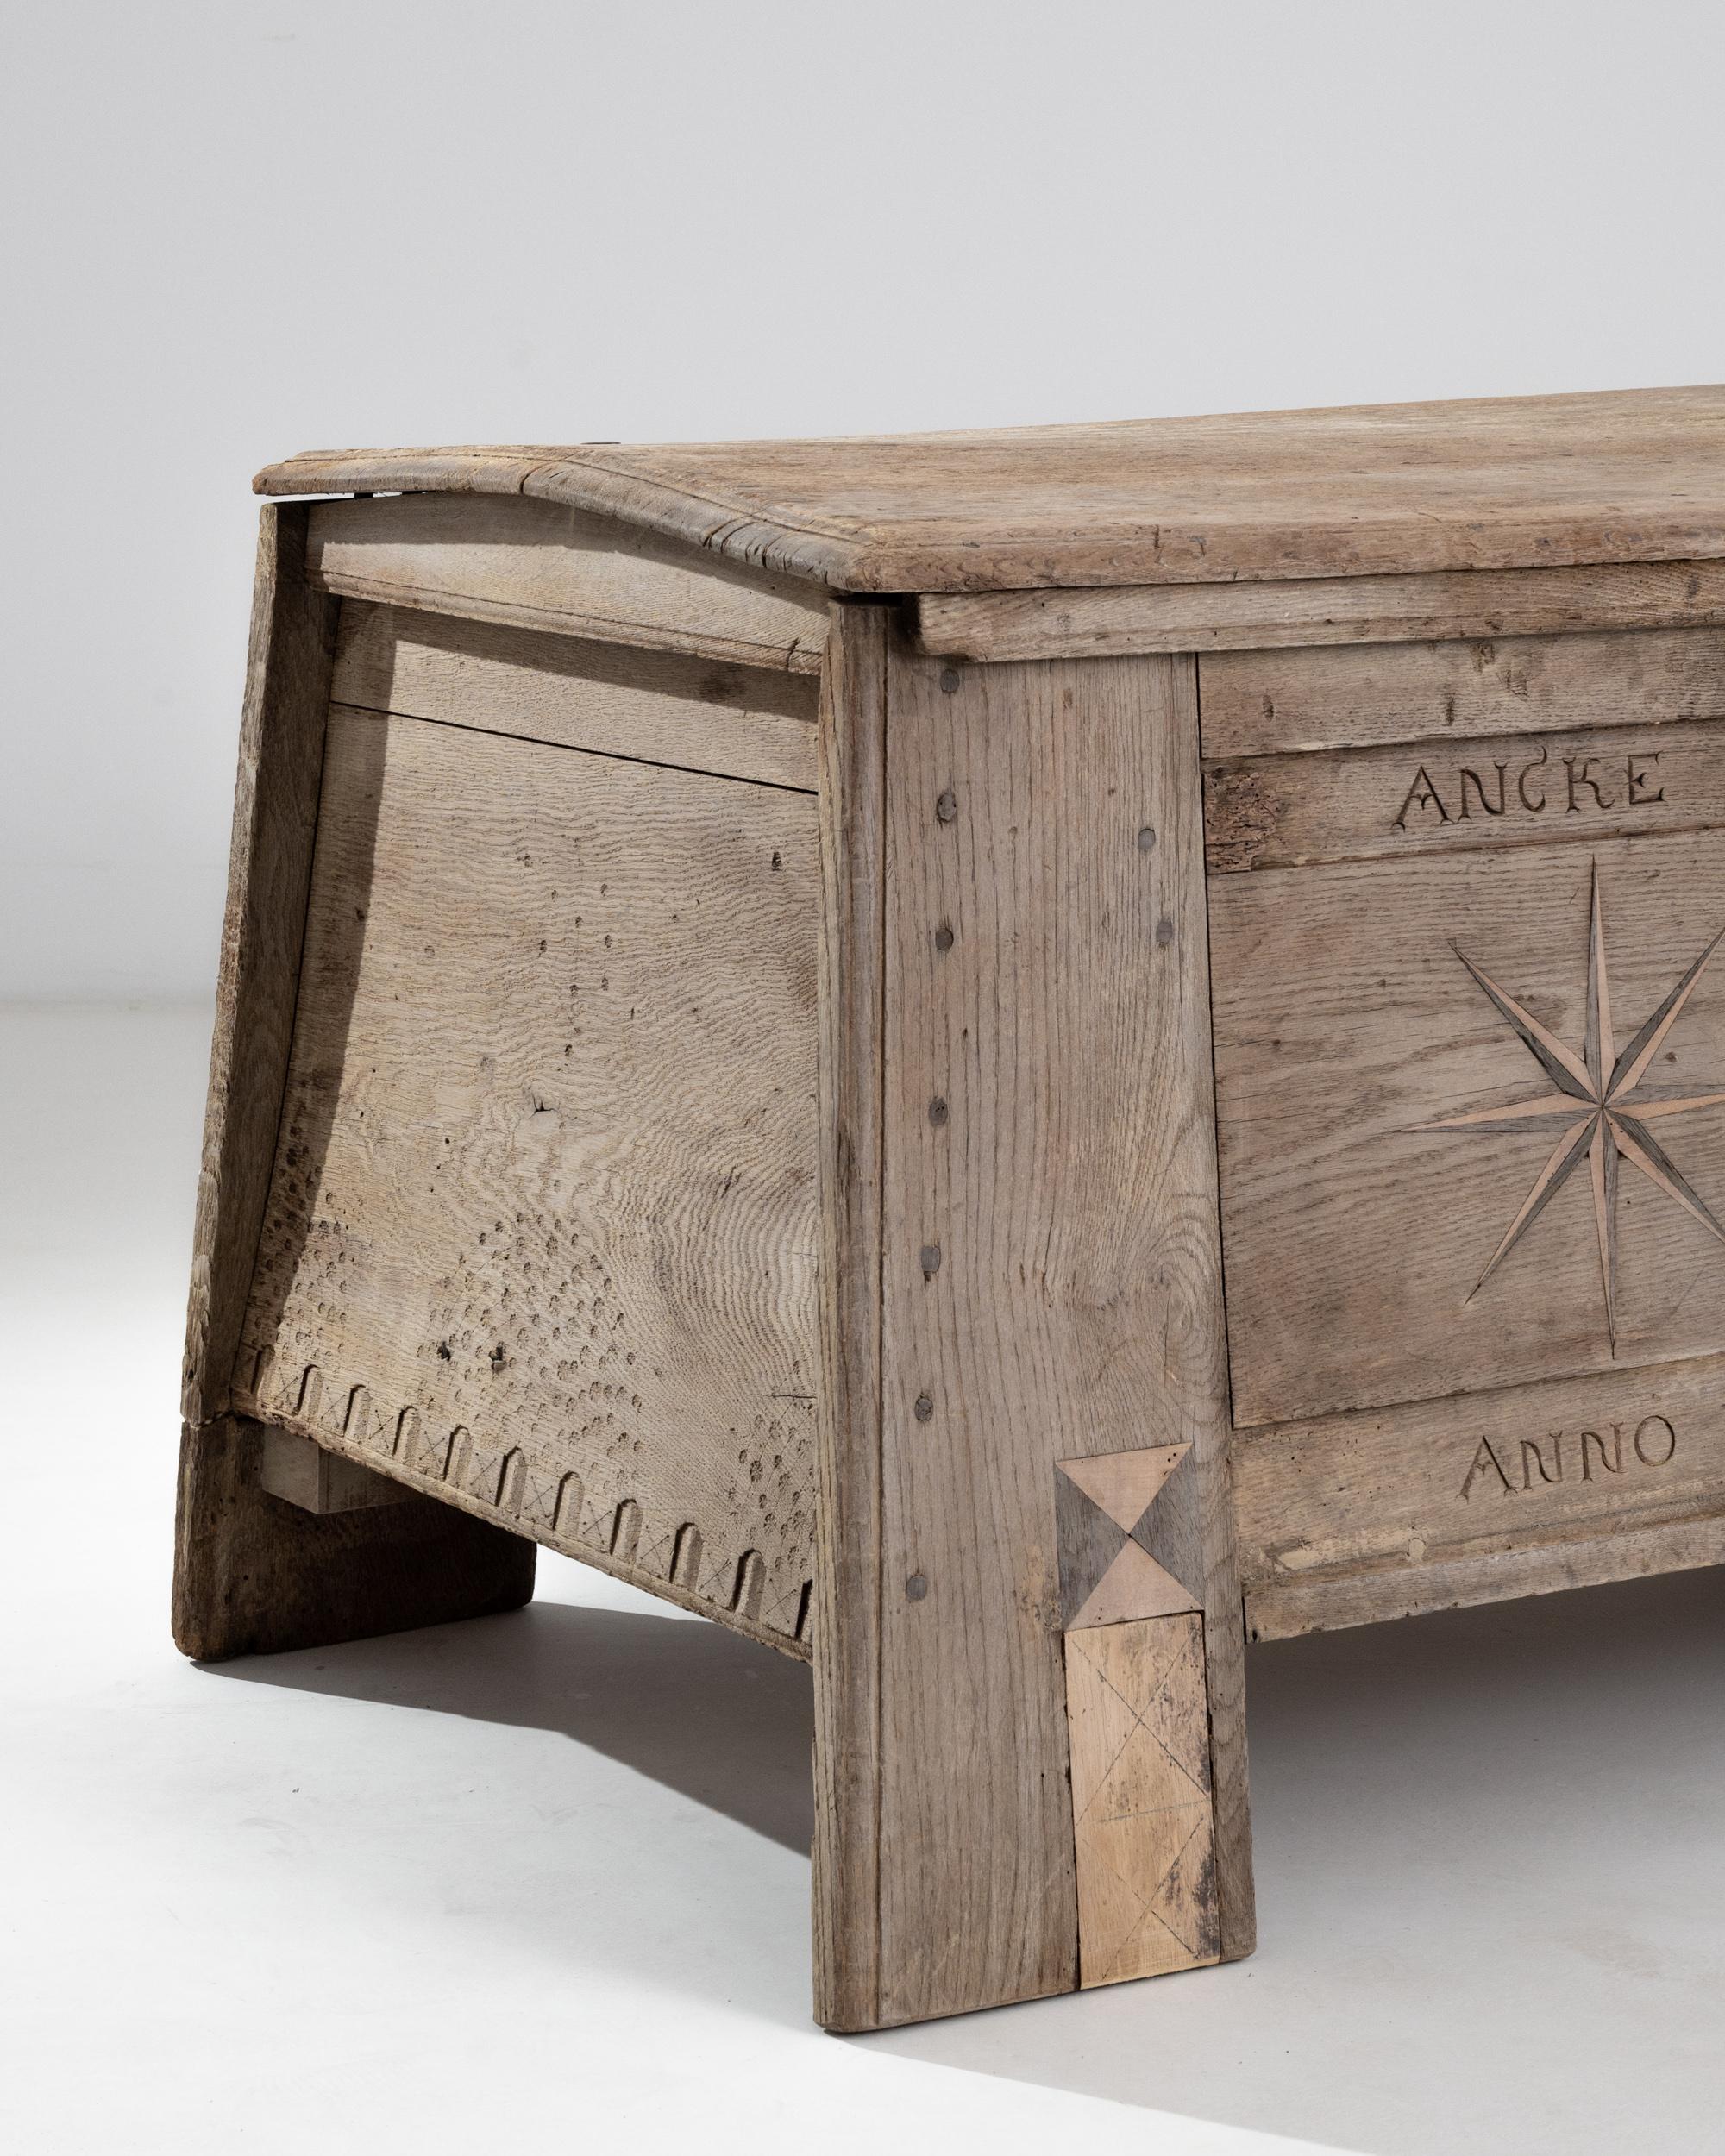 This impressive antique trunk is carved with the year of its construction, 1707 along with the name of its former owner, “Ancke Eggers”. Wide plank legs playfully juxtapose against the slightly cambered sides, adding fluidity to its robust anatomy.